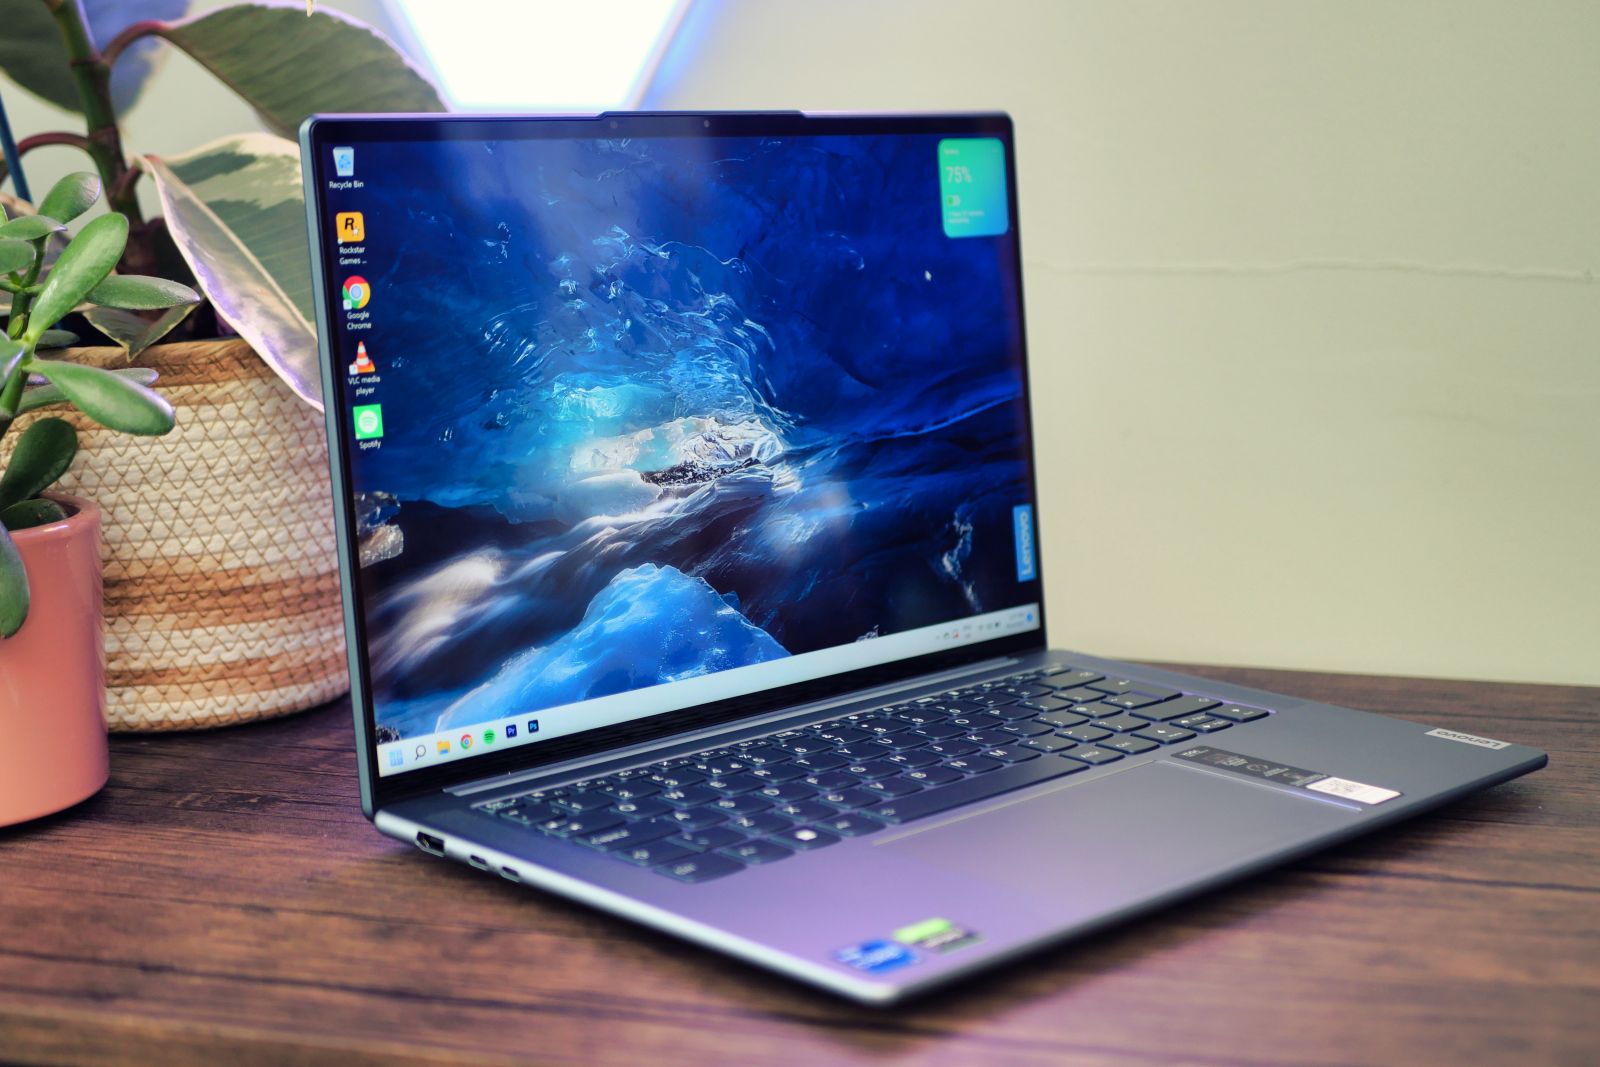 Lenovo Yoga Pro 7 14 review - The almost perfect ultrabook with